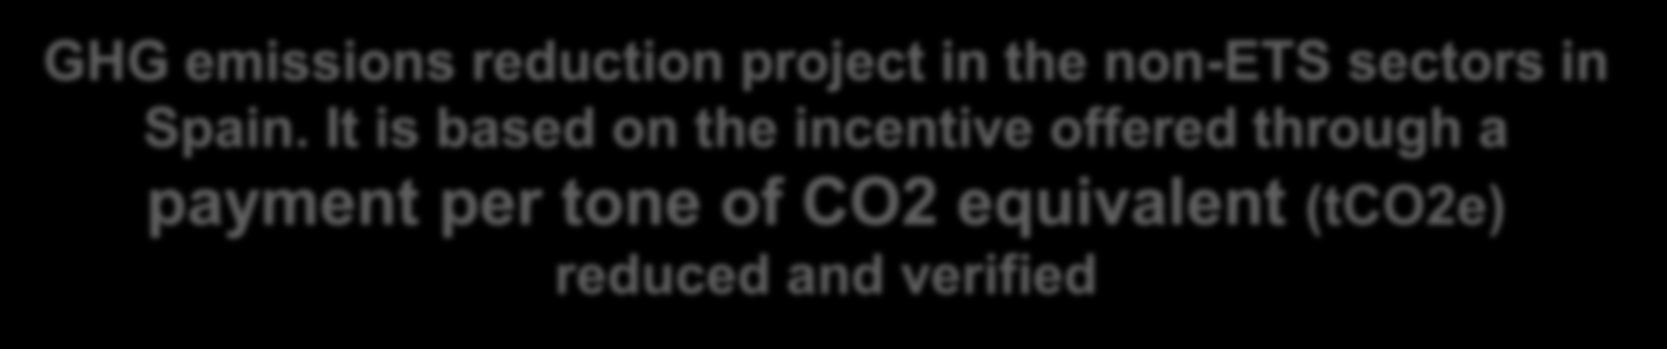 It is based on the incentive offered through a payment per tone of CO2 equivalent (tco2e)